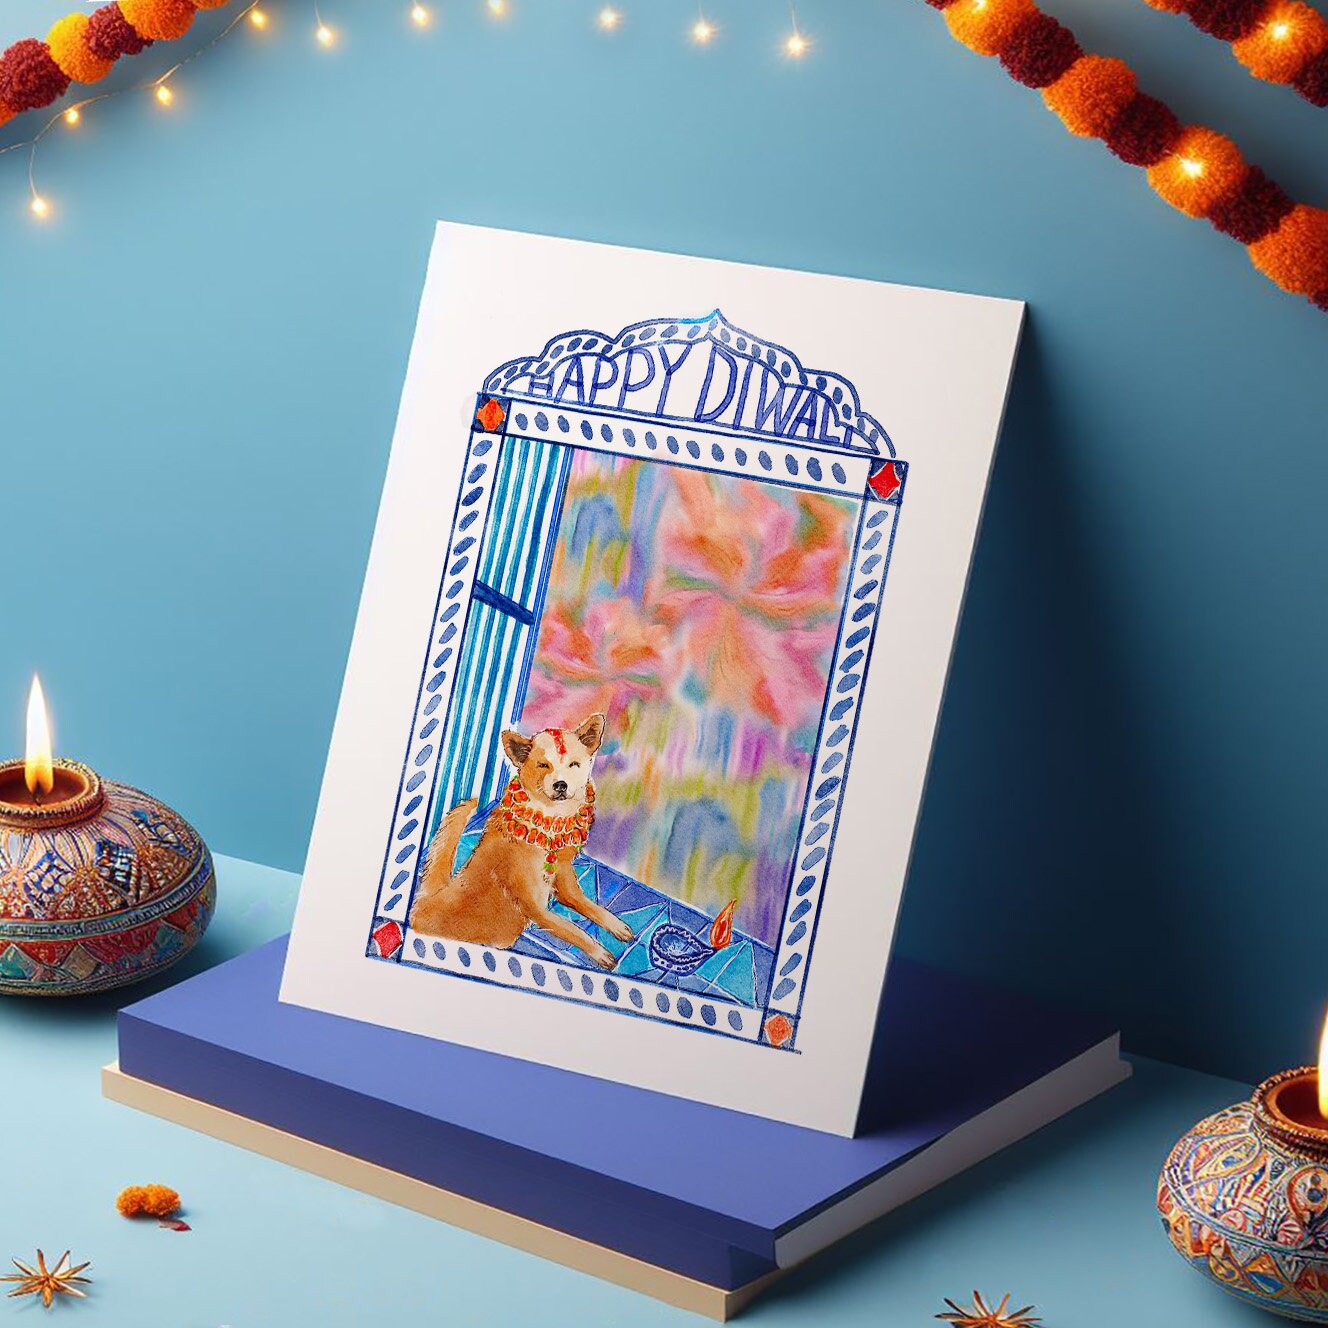 Fireworks Windows Festival Of Lights Happy Diwali Cards - Diwali Gifts Holiday Cards - Handmade Cards By Liyana Studio Greeting